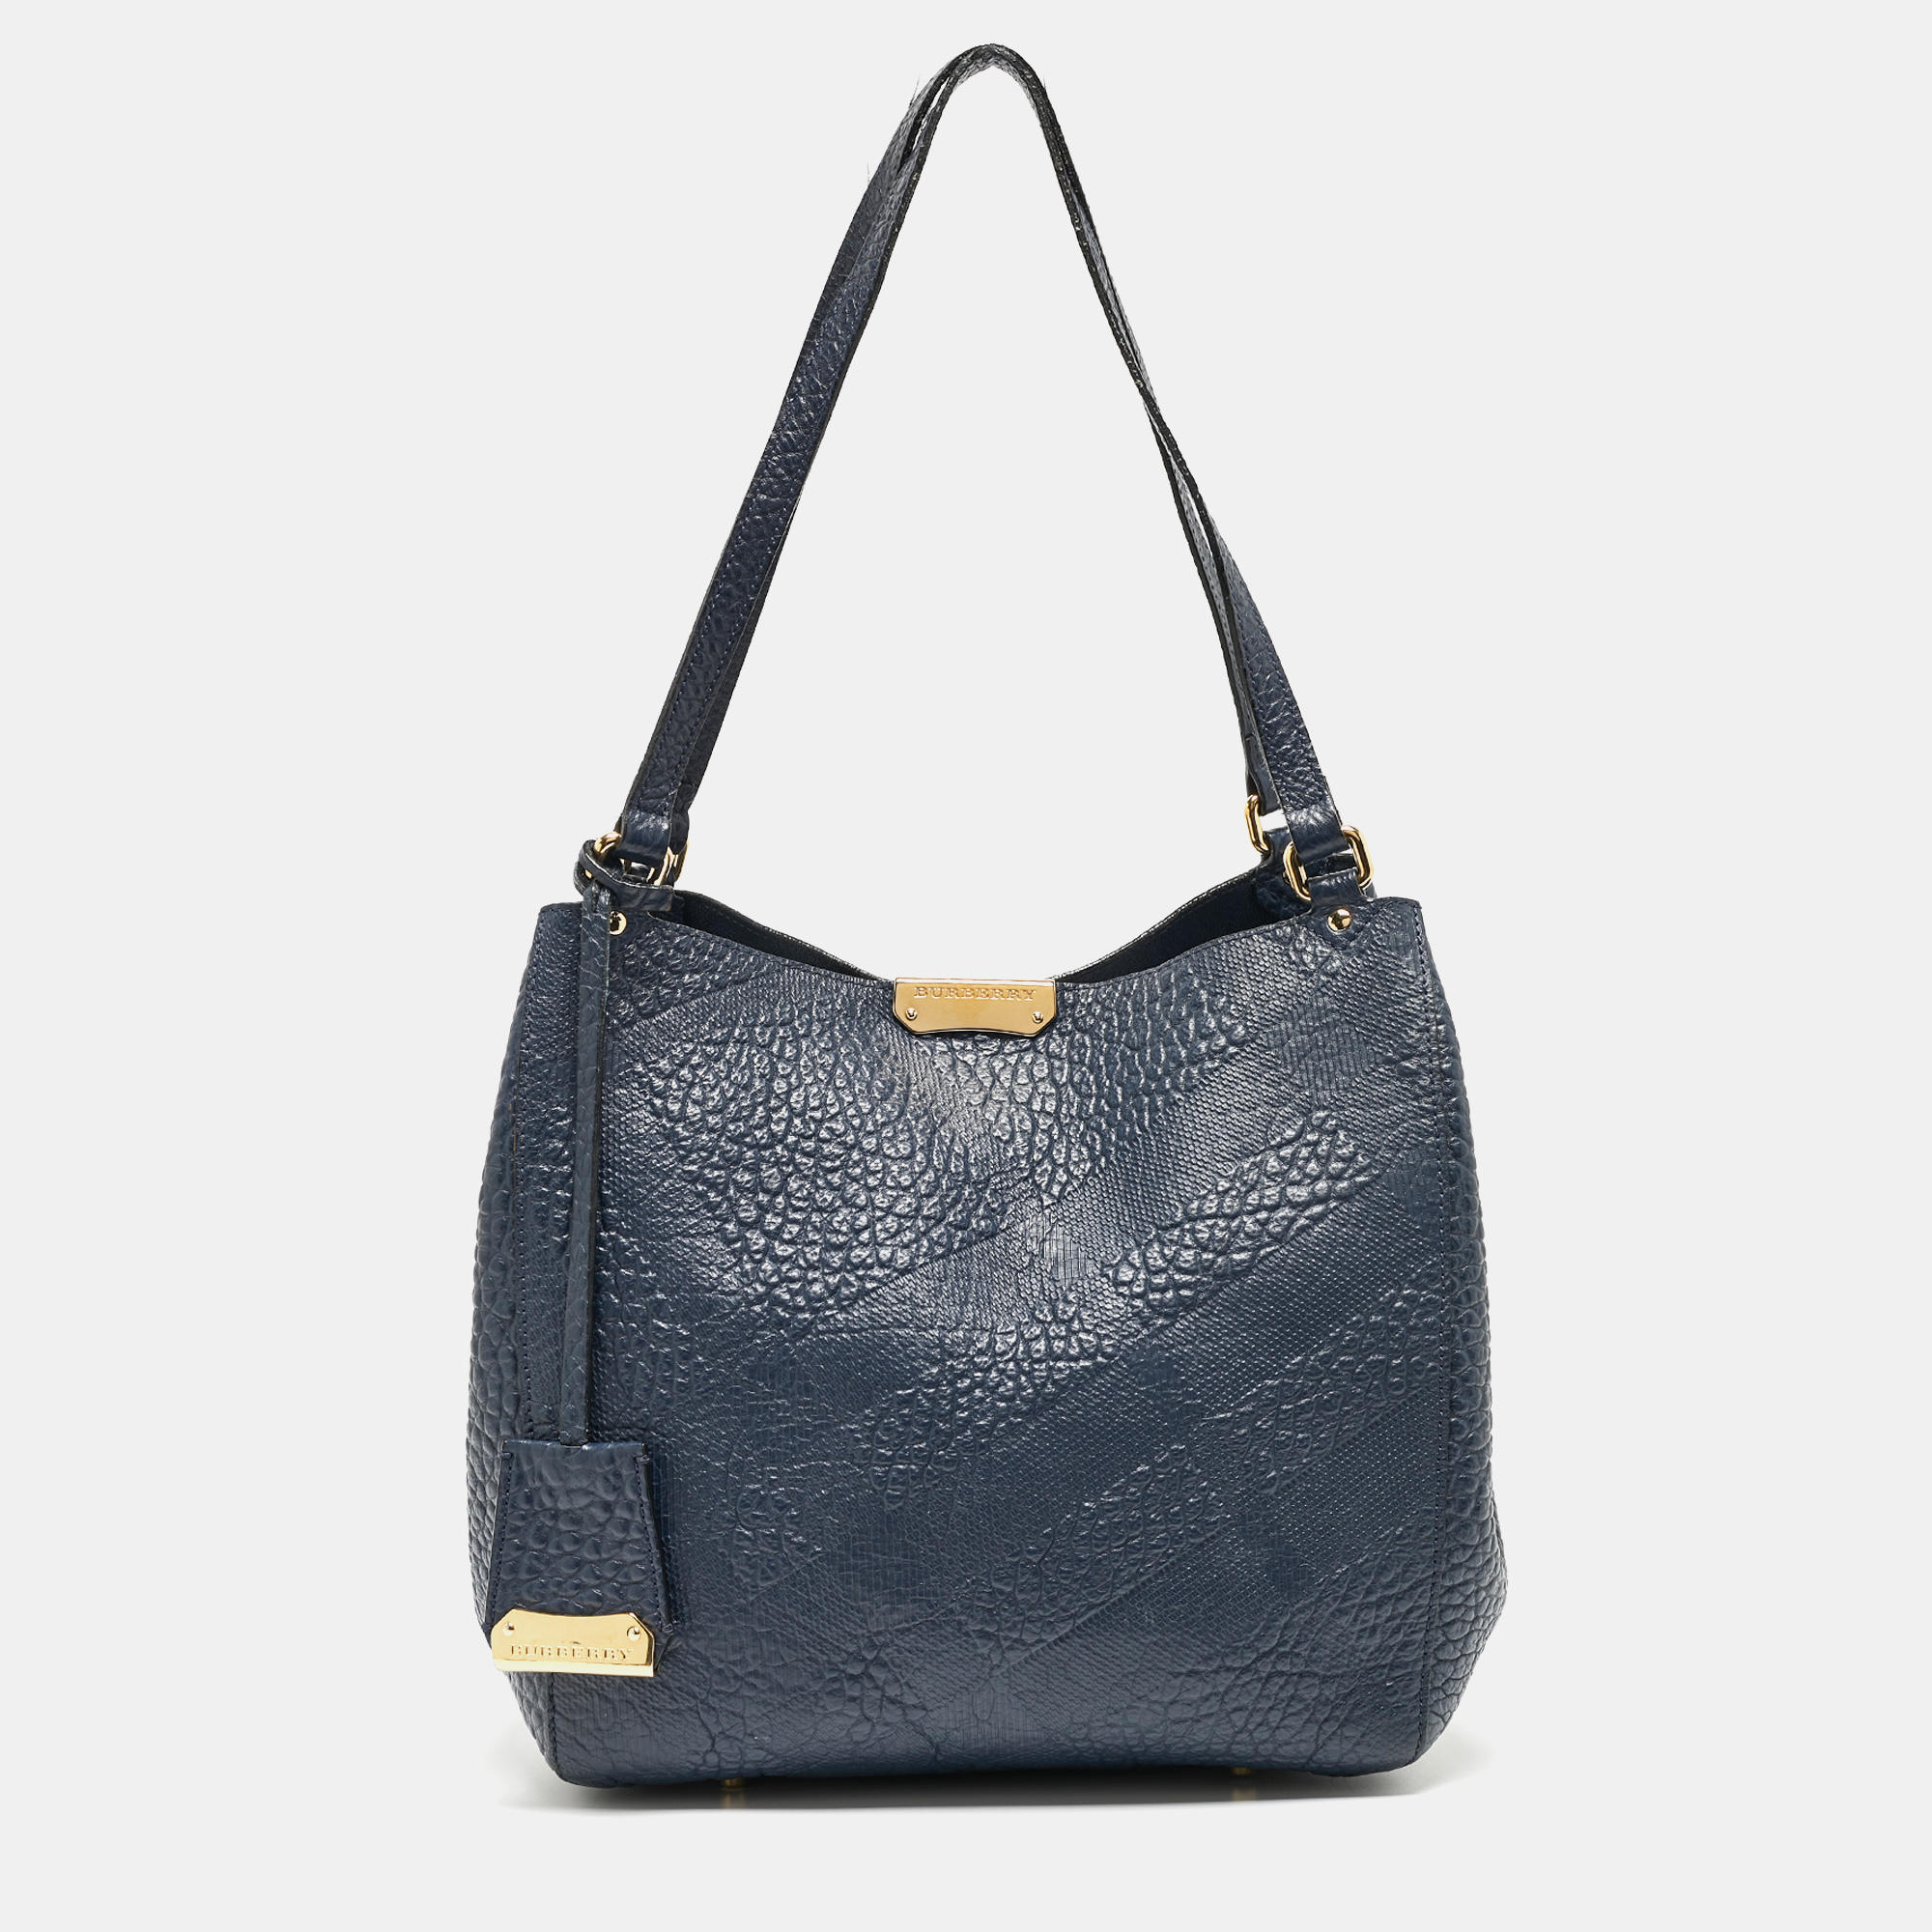 Burberry navy blue embossed leather canterbury tote